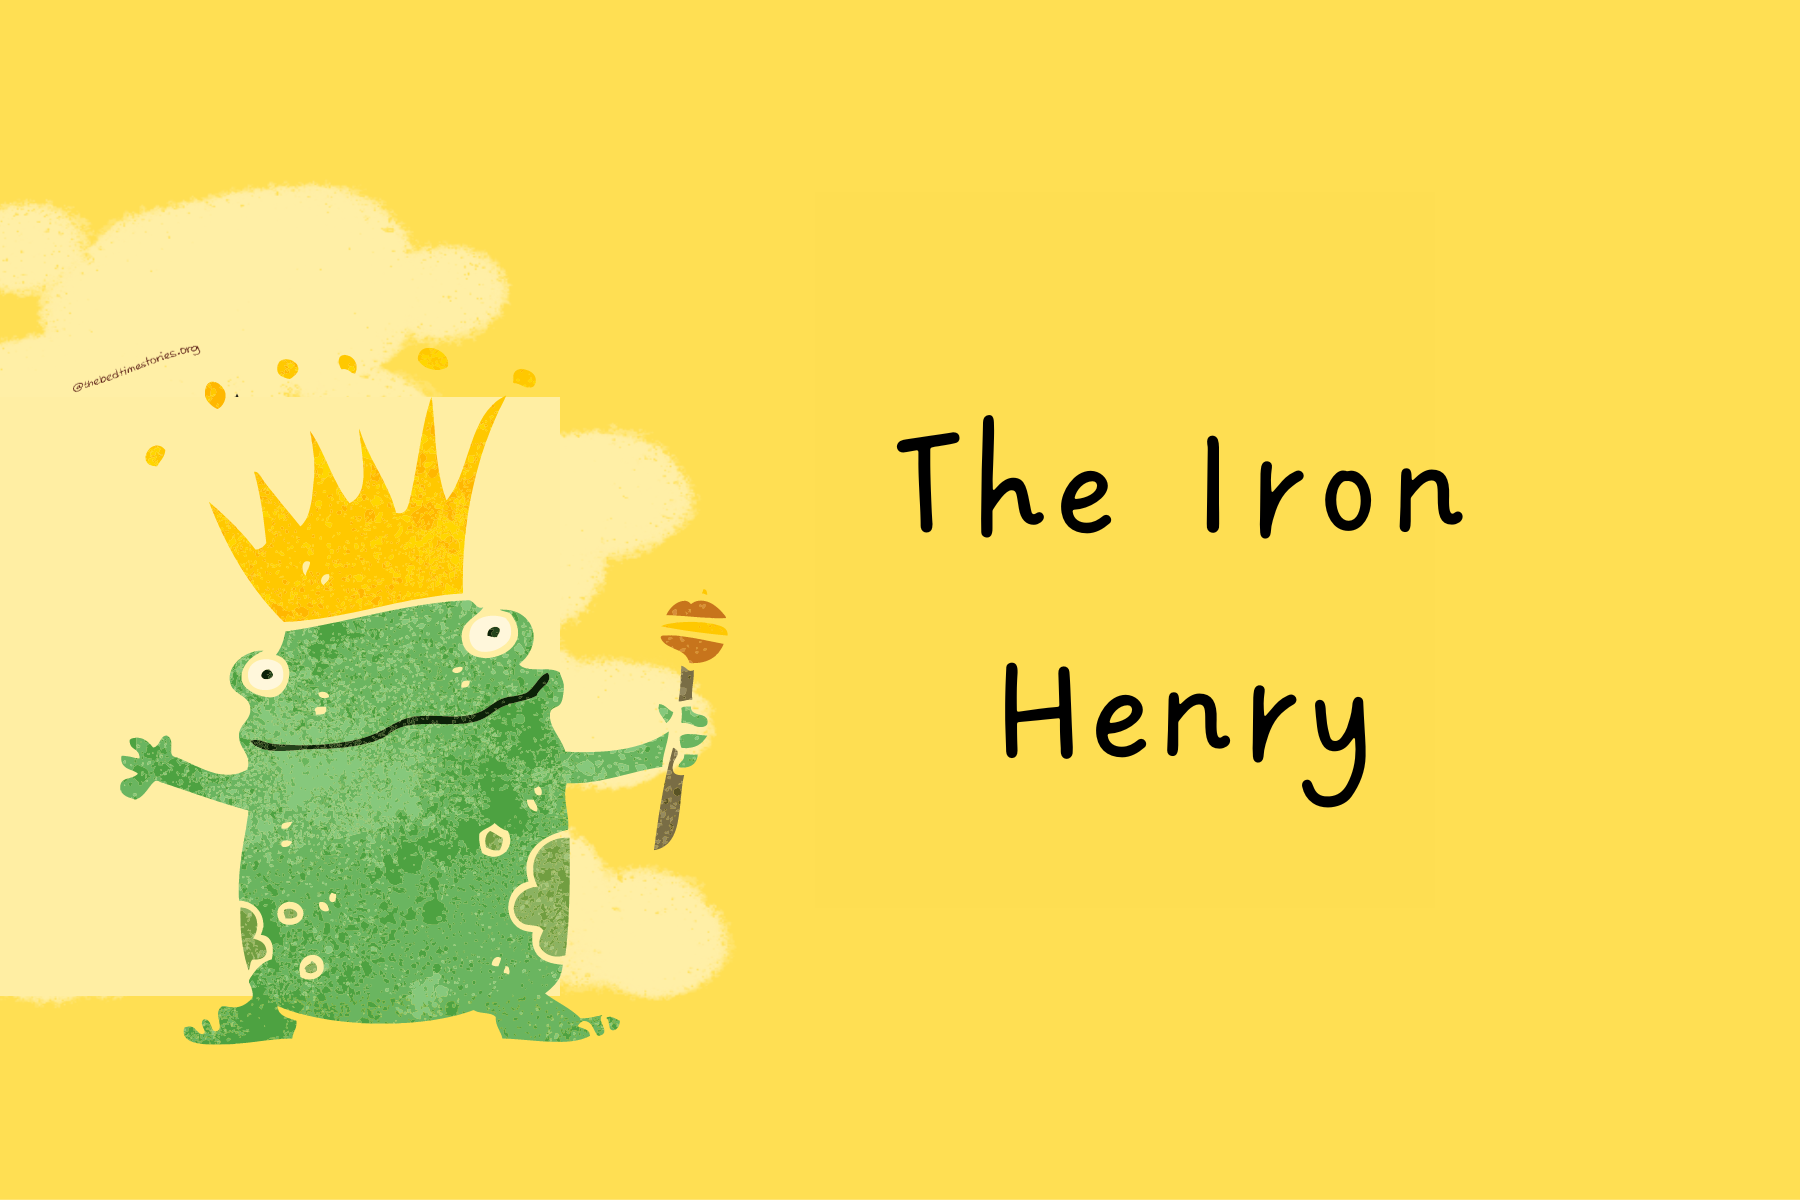 The Iron Henry: Best Top 5 BedTime Moral Stories